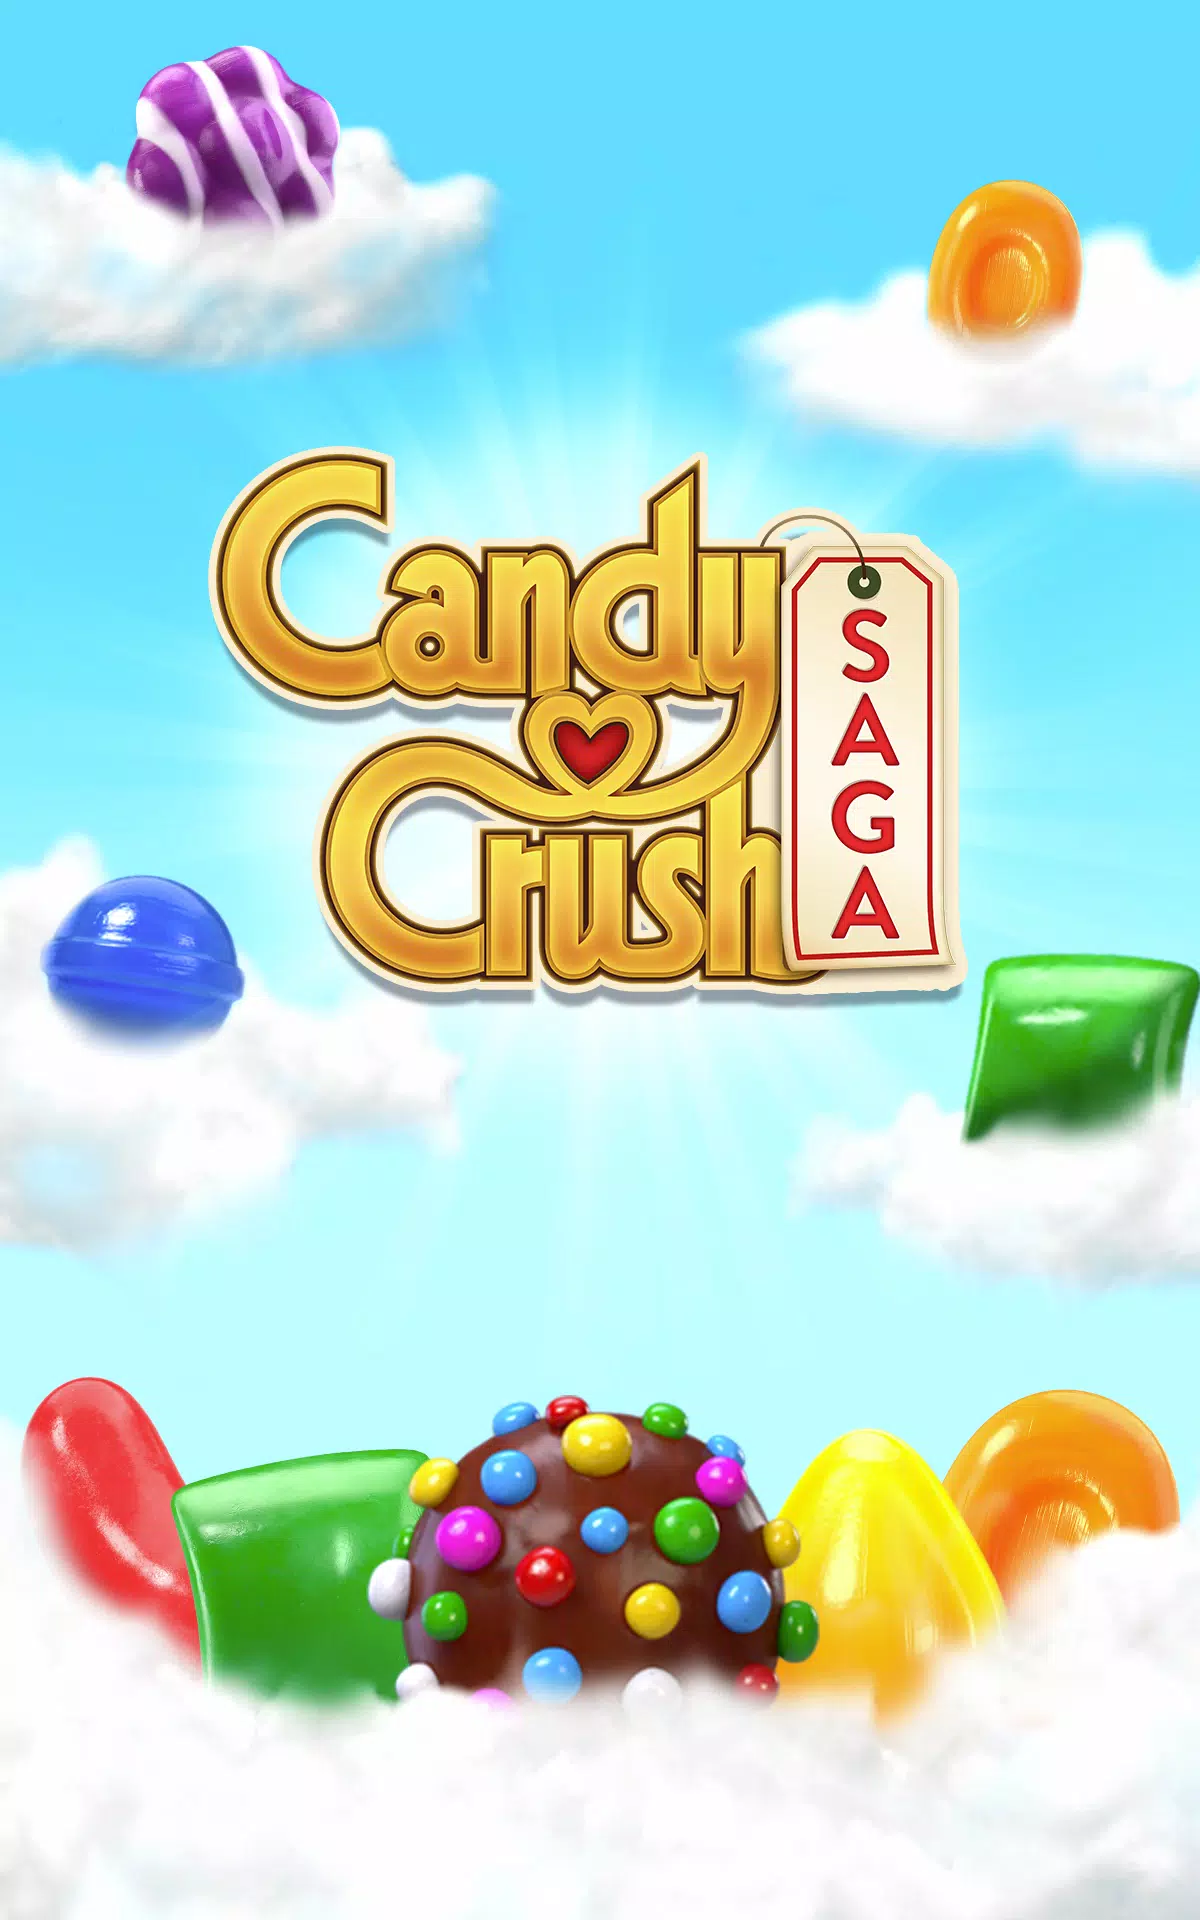 Play Candy Crush Slots for Free and 2023 Gameplay Guide